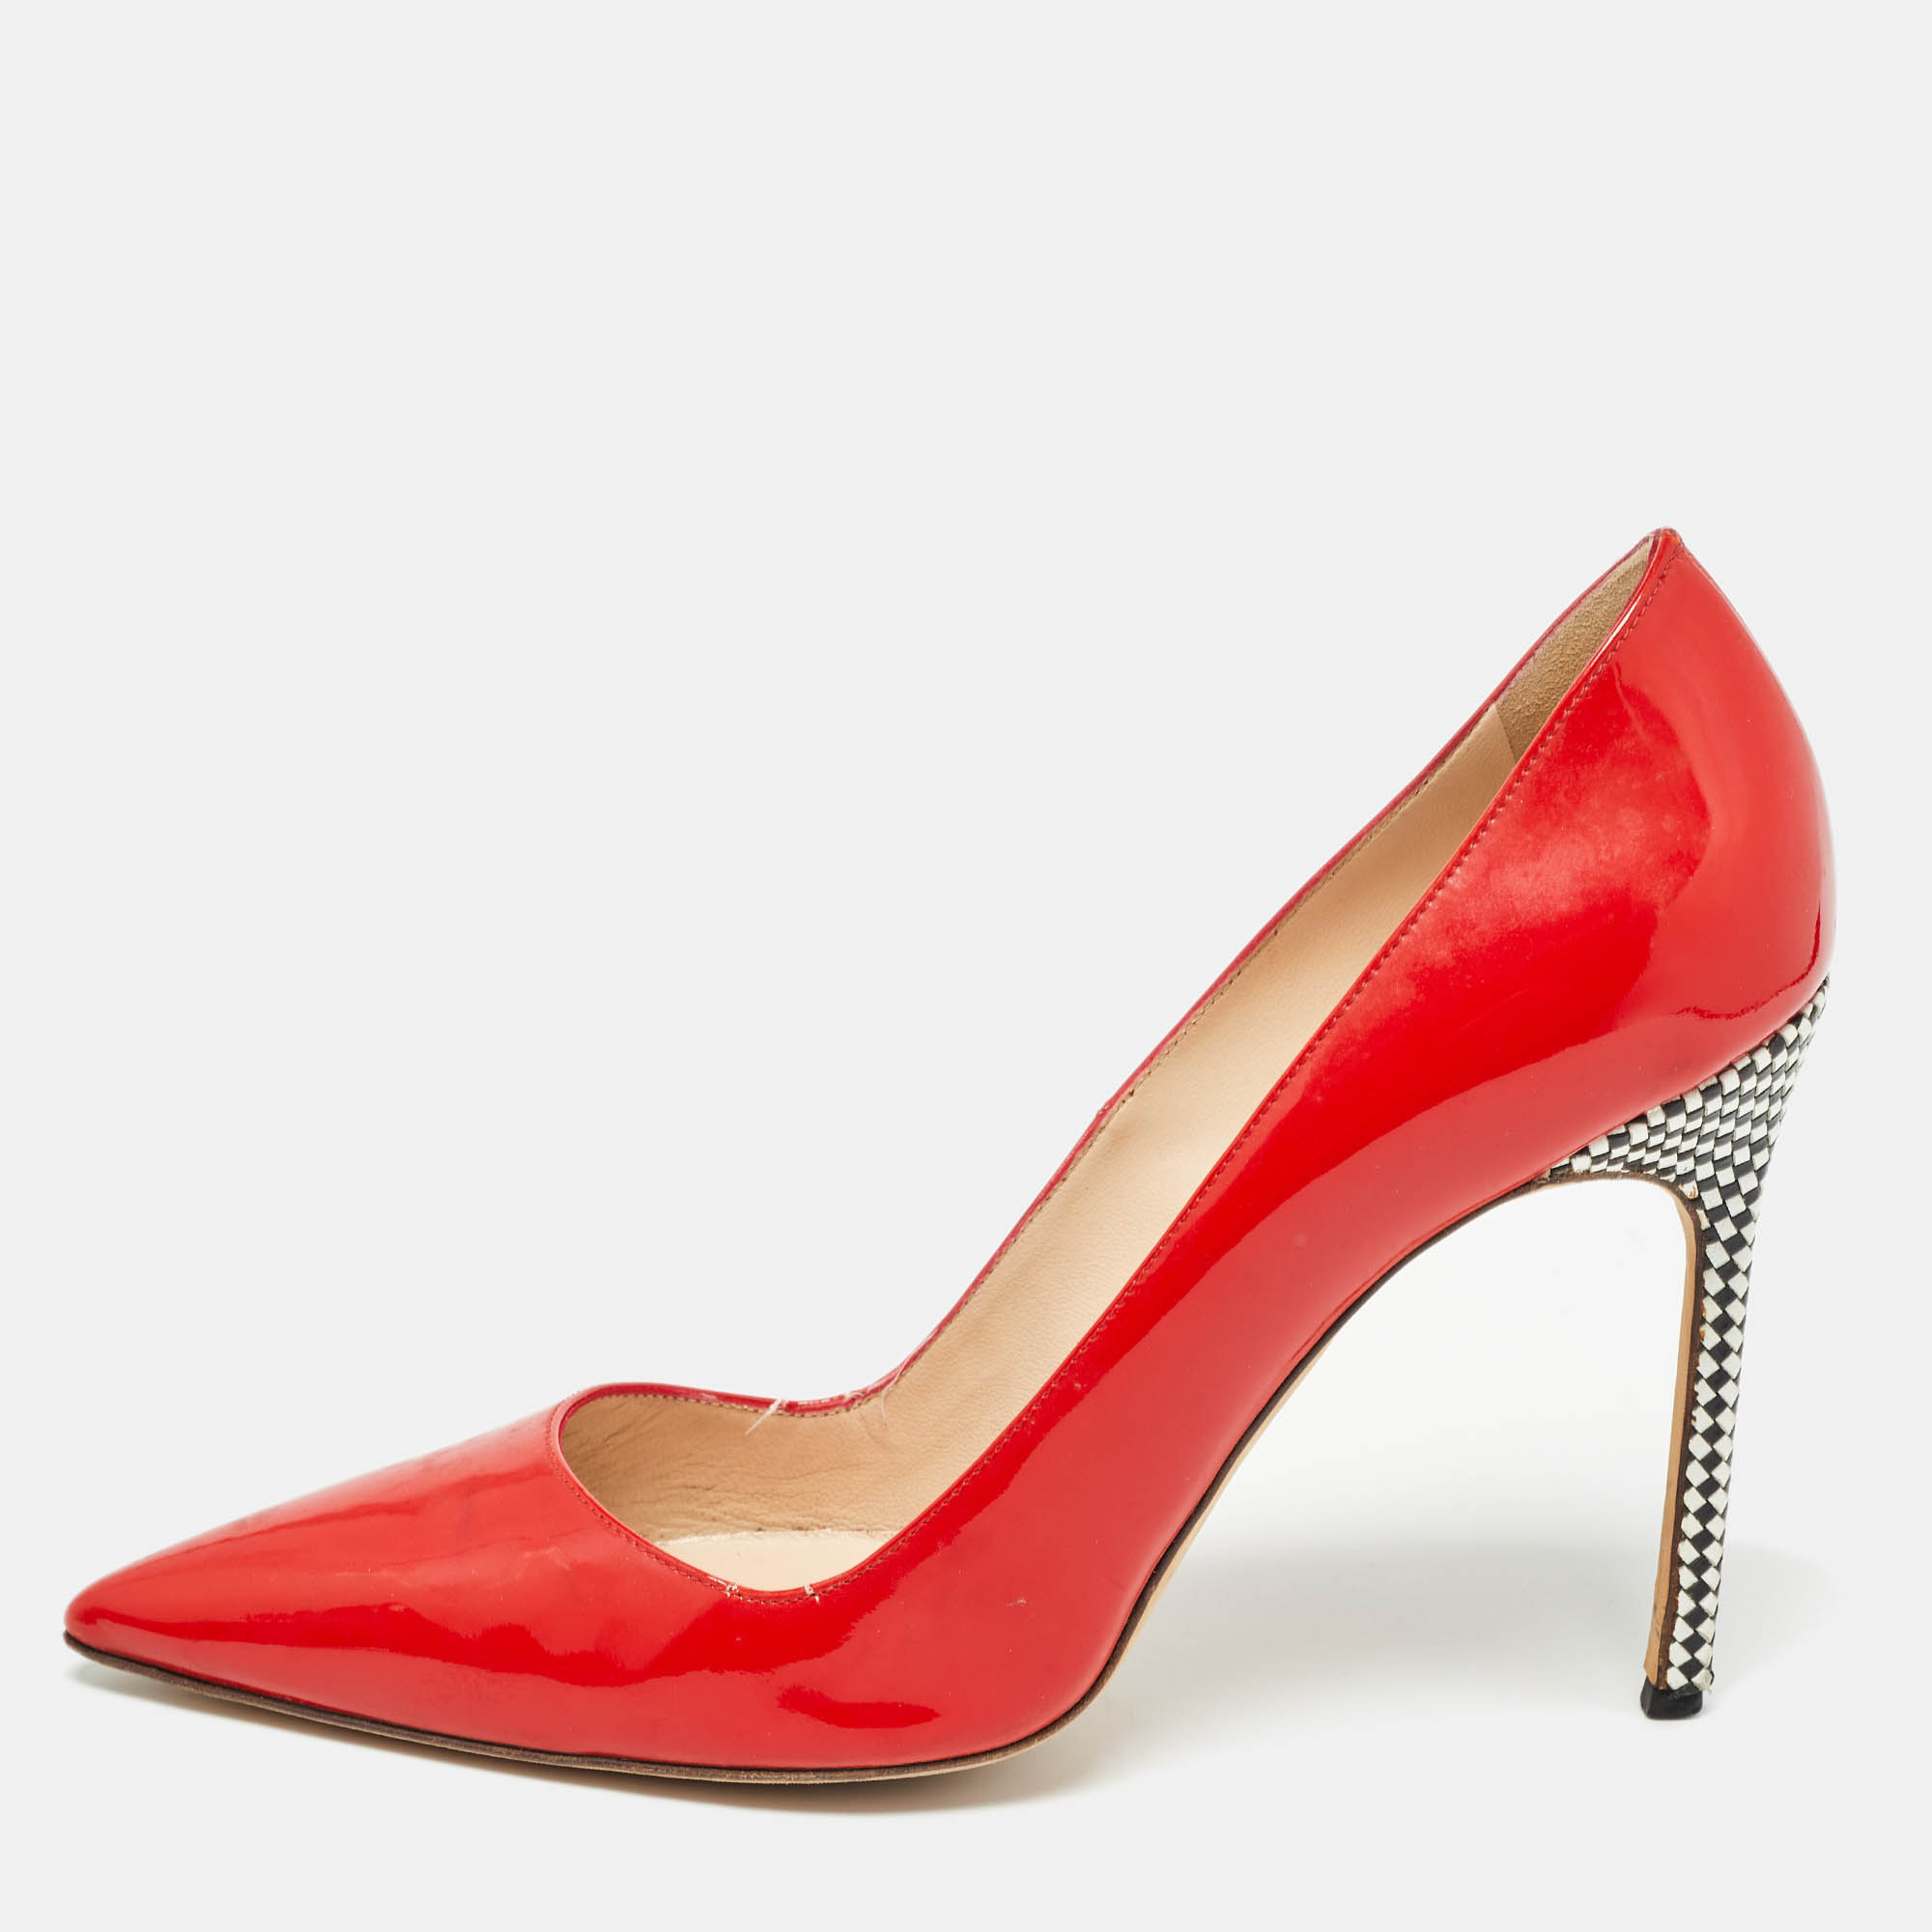 Manolo blahnik red patent leather pointed toe pumps size 40